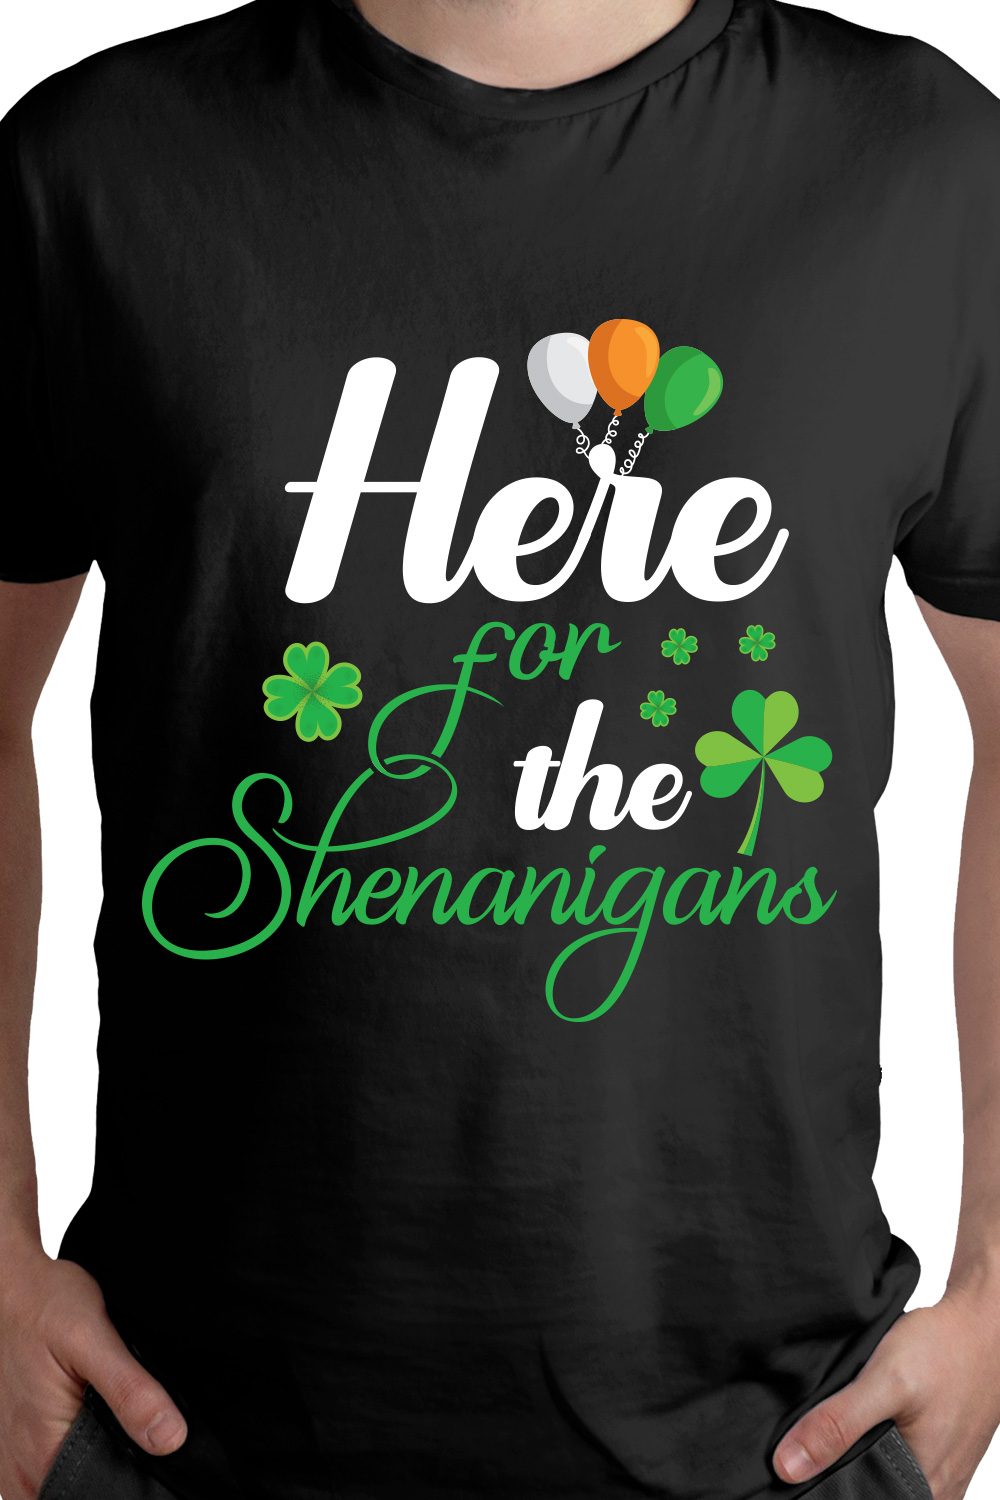 St Patrick's day here for the shenanigans t-shirt design pinterest preview image.